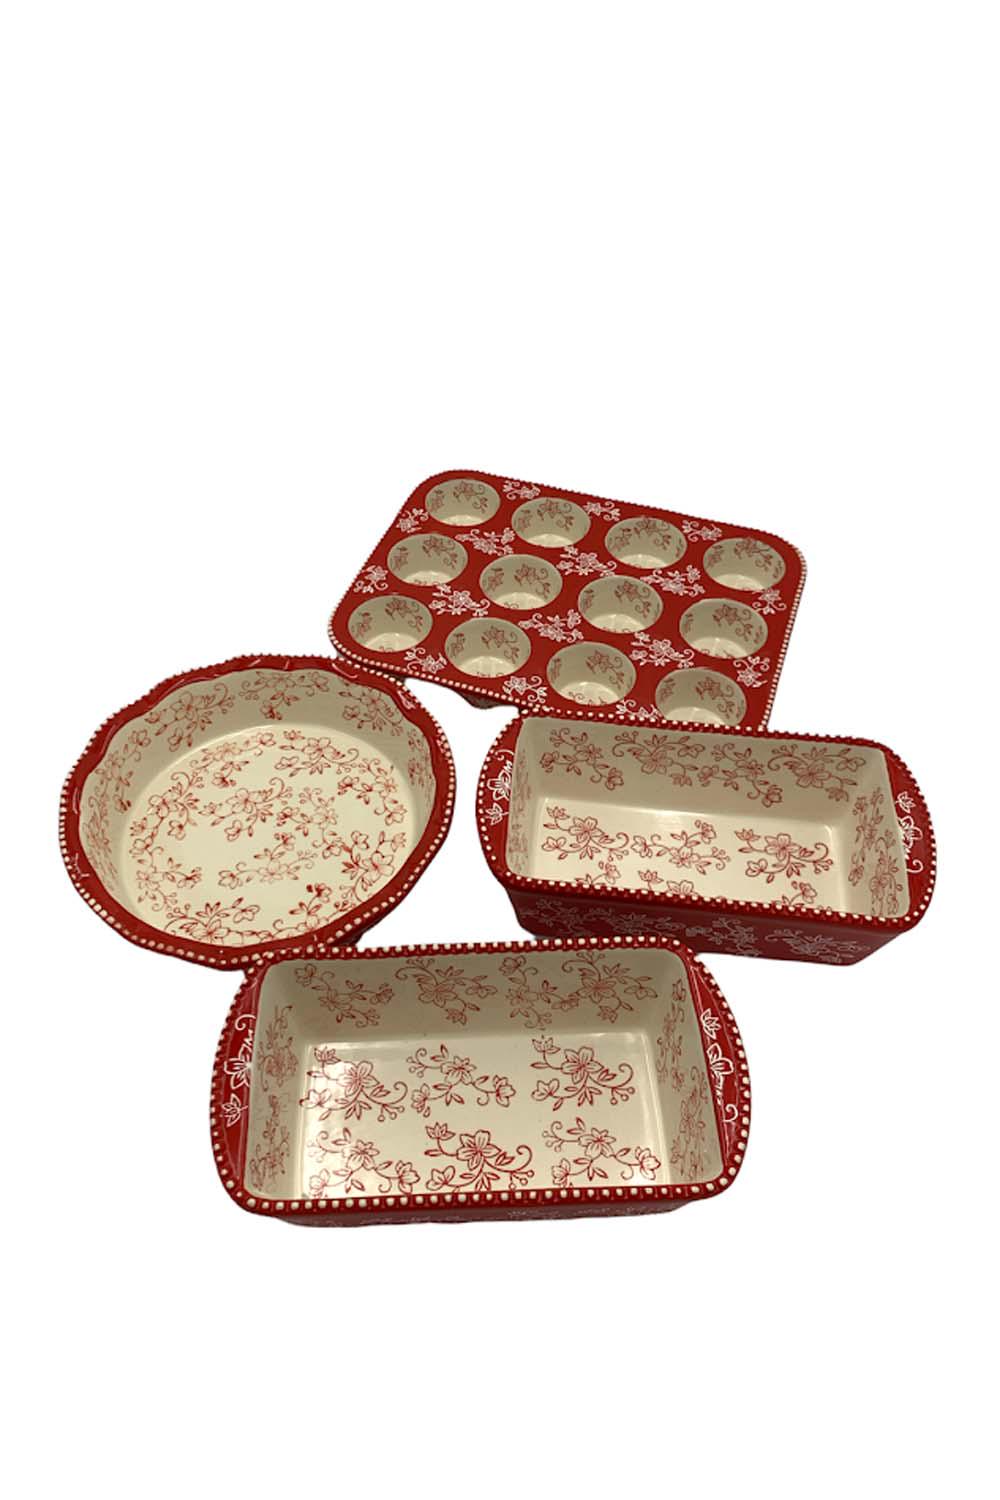 Temp-tations Floral Lace Fluted Tube Pan w/Serving Tray 